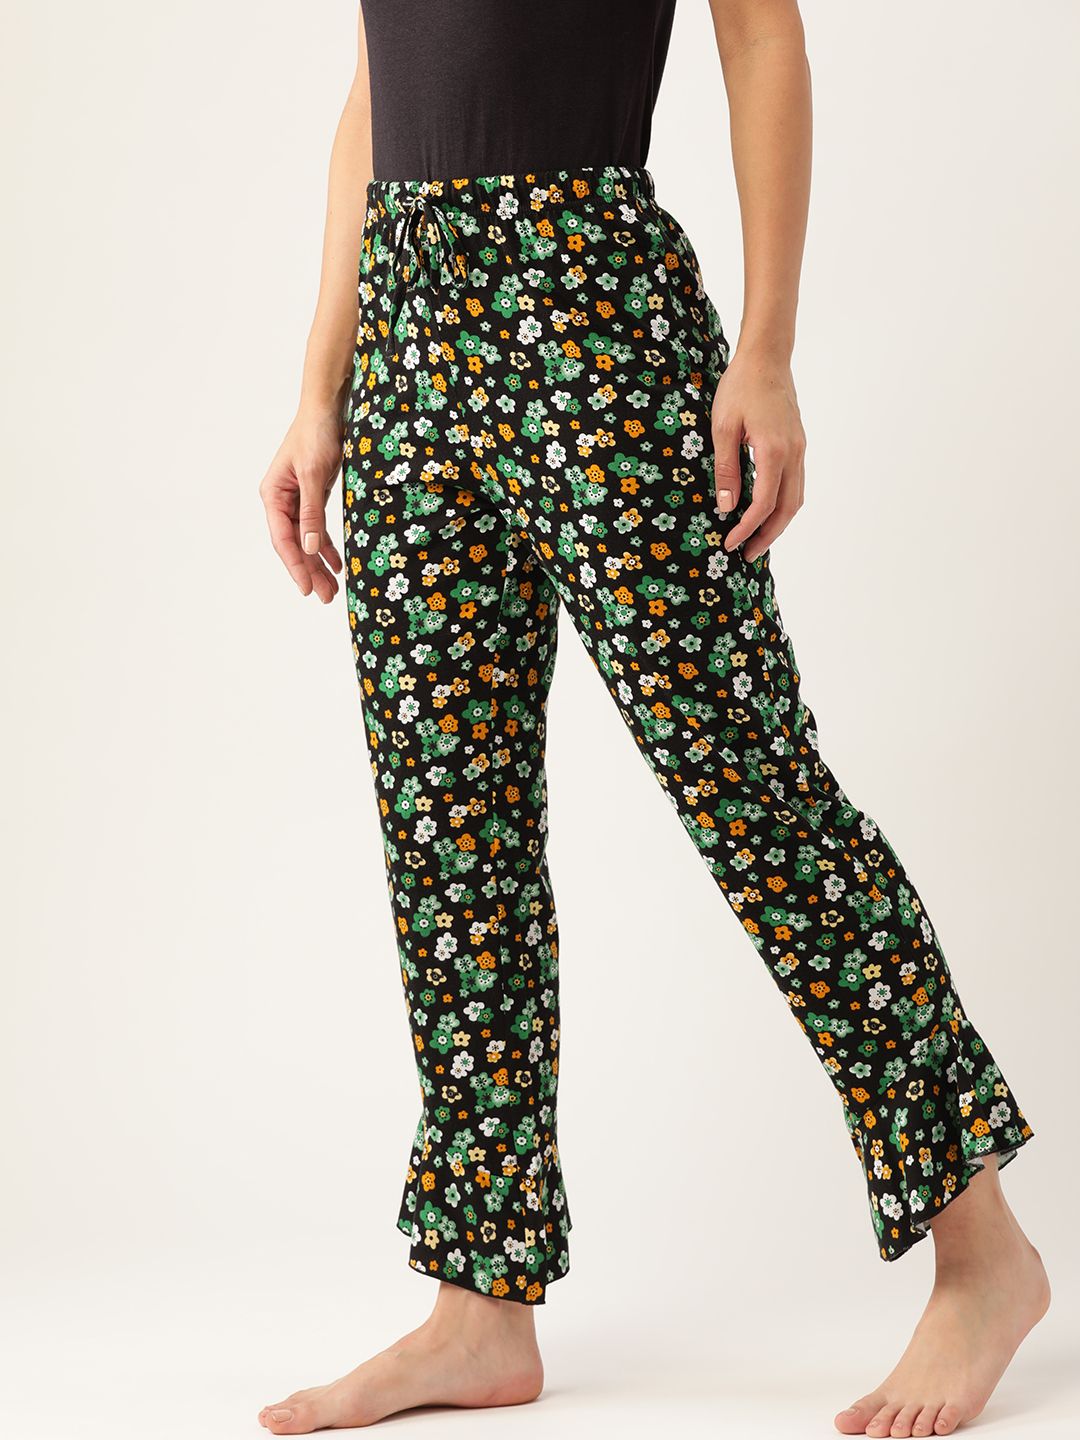 ETC Women Black & Green Printed Pure Cotton Lounge Pants Price in India